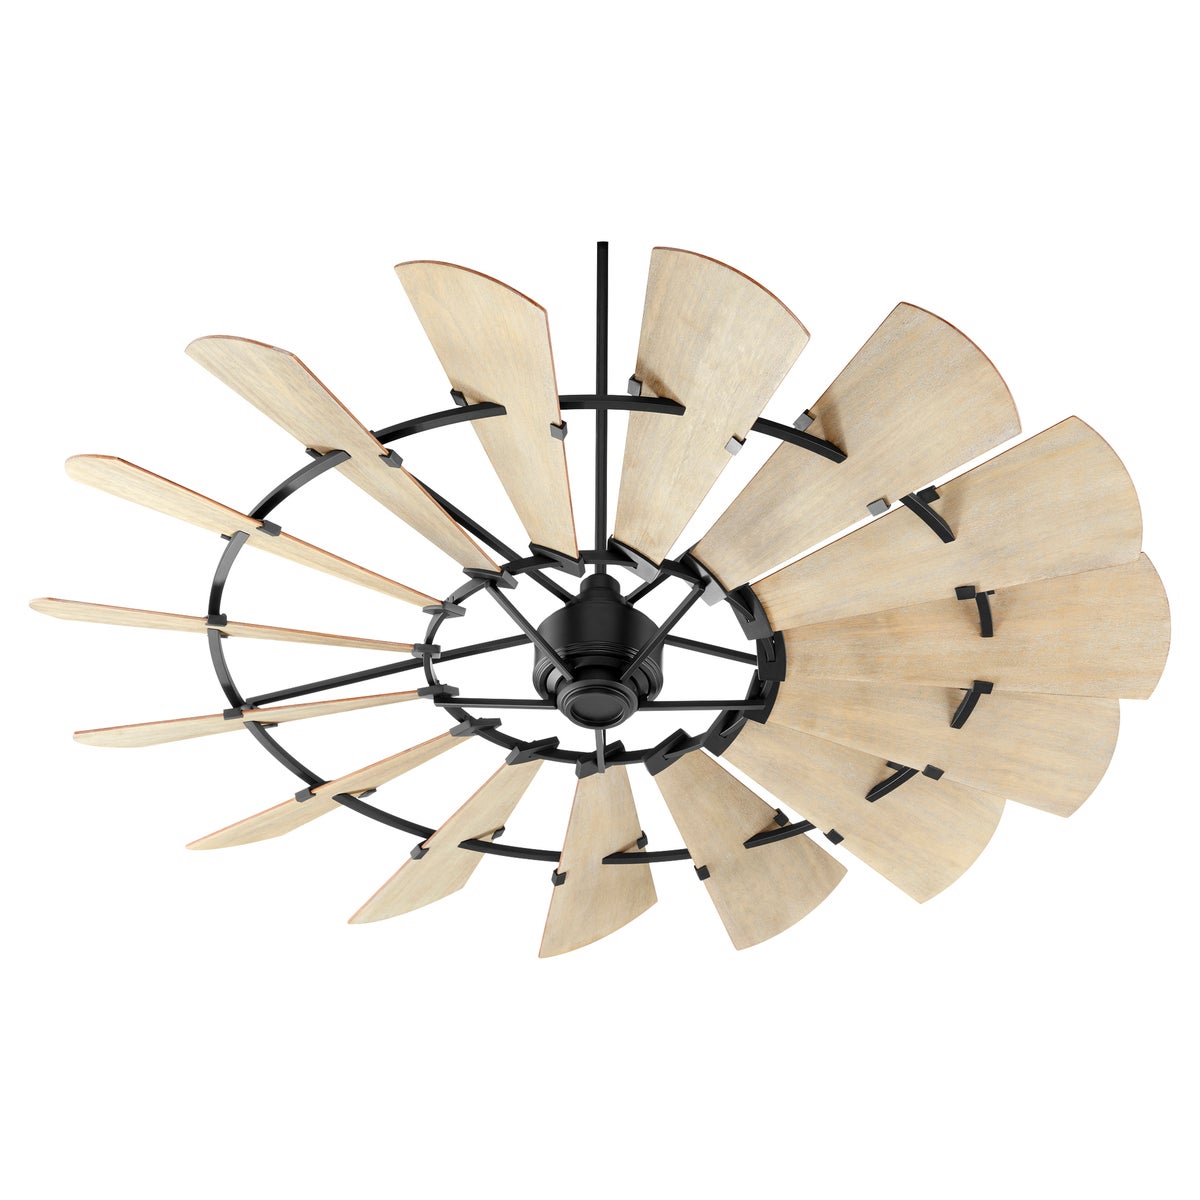 Farmhouse Ceiling Fan with 15 wooden blades in weathered oak finish, rustic design inspired by outdoor windmills. Quorum International DC-165L motor, UL Listed, Dry Location safety rating. Dimensions: 16.5&quot;H x 72&quot;W. Limited Lifetime warranty.